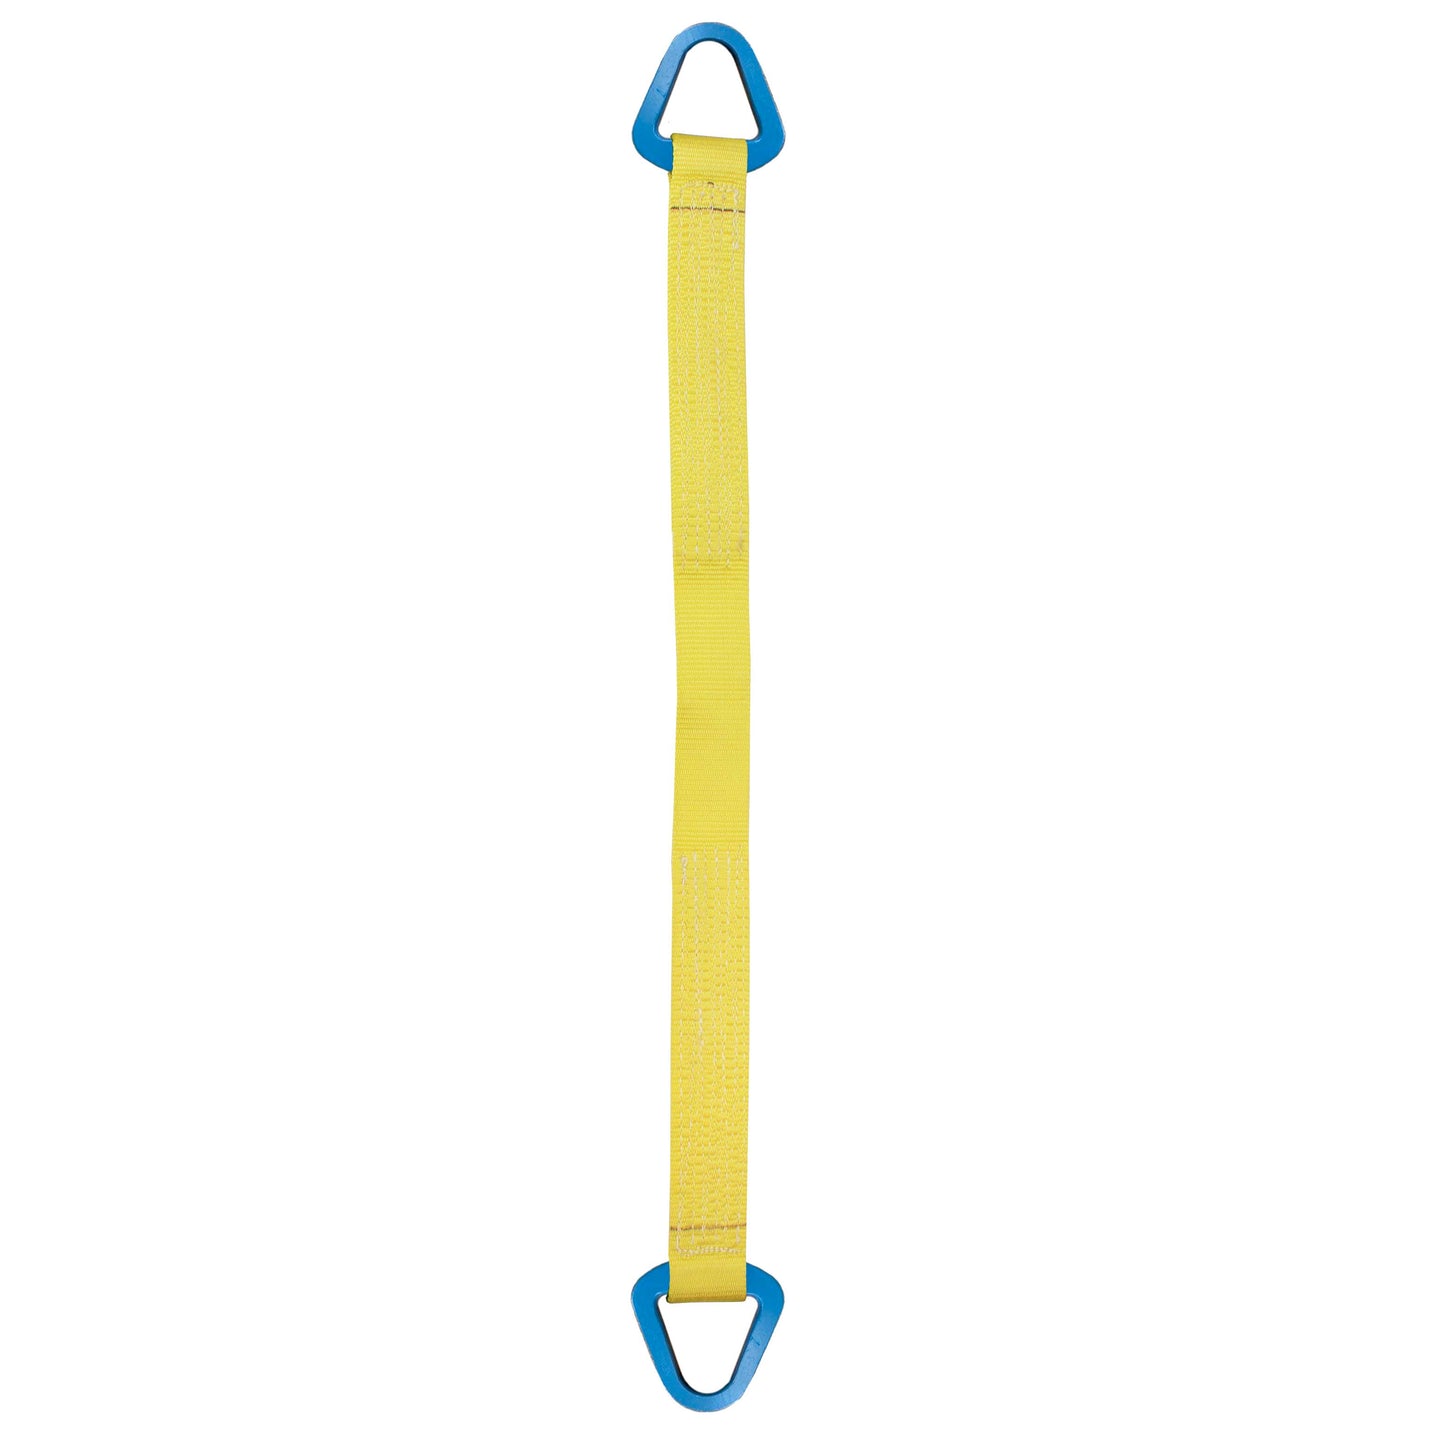 Nylon Lifting Sling Triangle 4 inch x 8 foot 1ply image 1 of 2